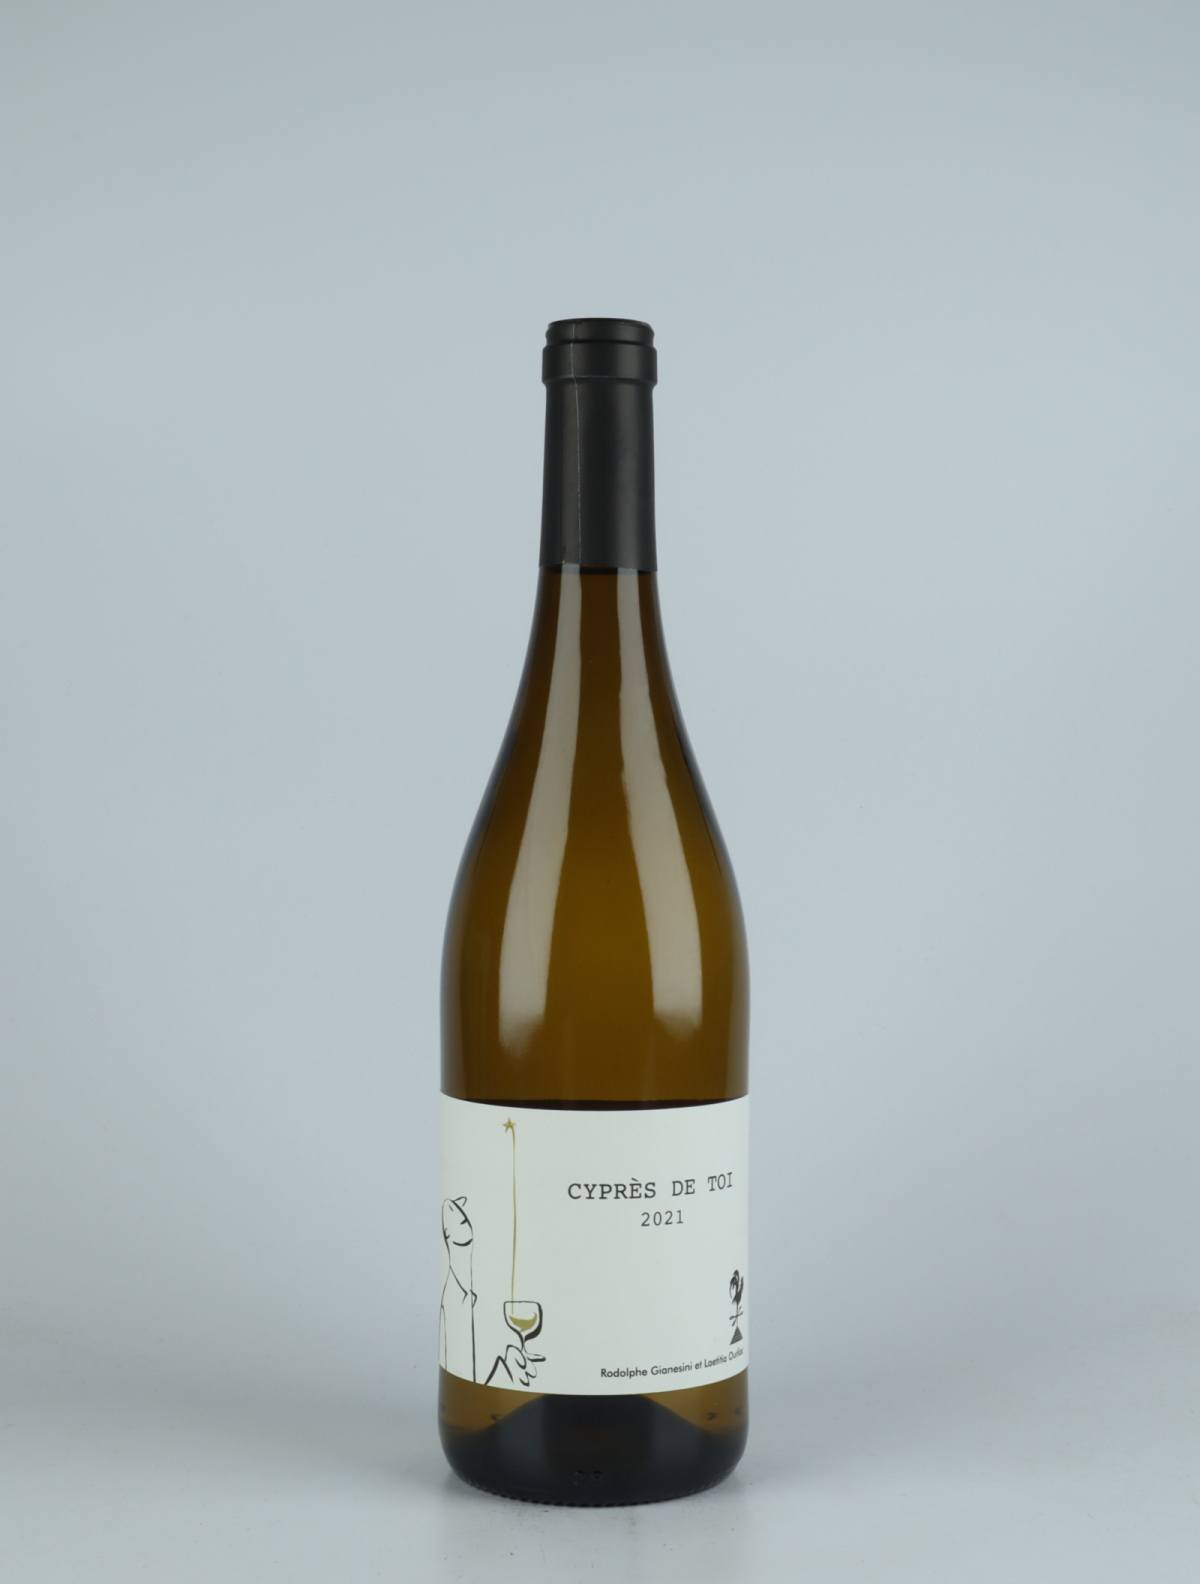 A bottle 2021 Cypres de Toi Blanc White wine from Fond Cyprès, Languedoc in France